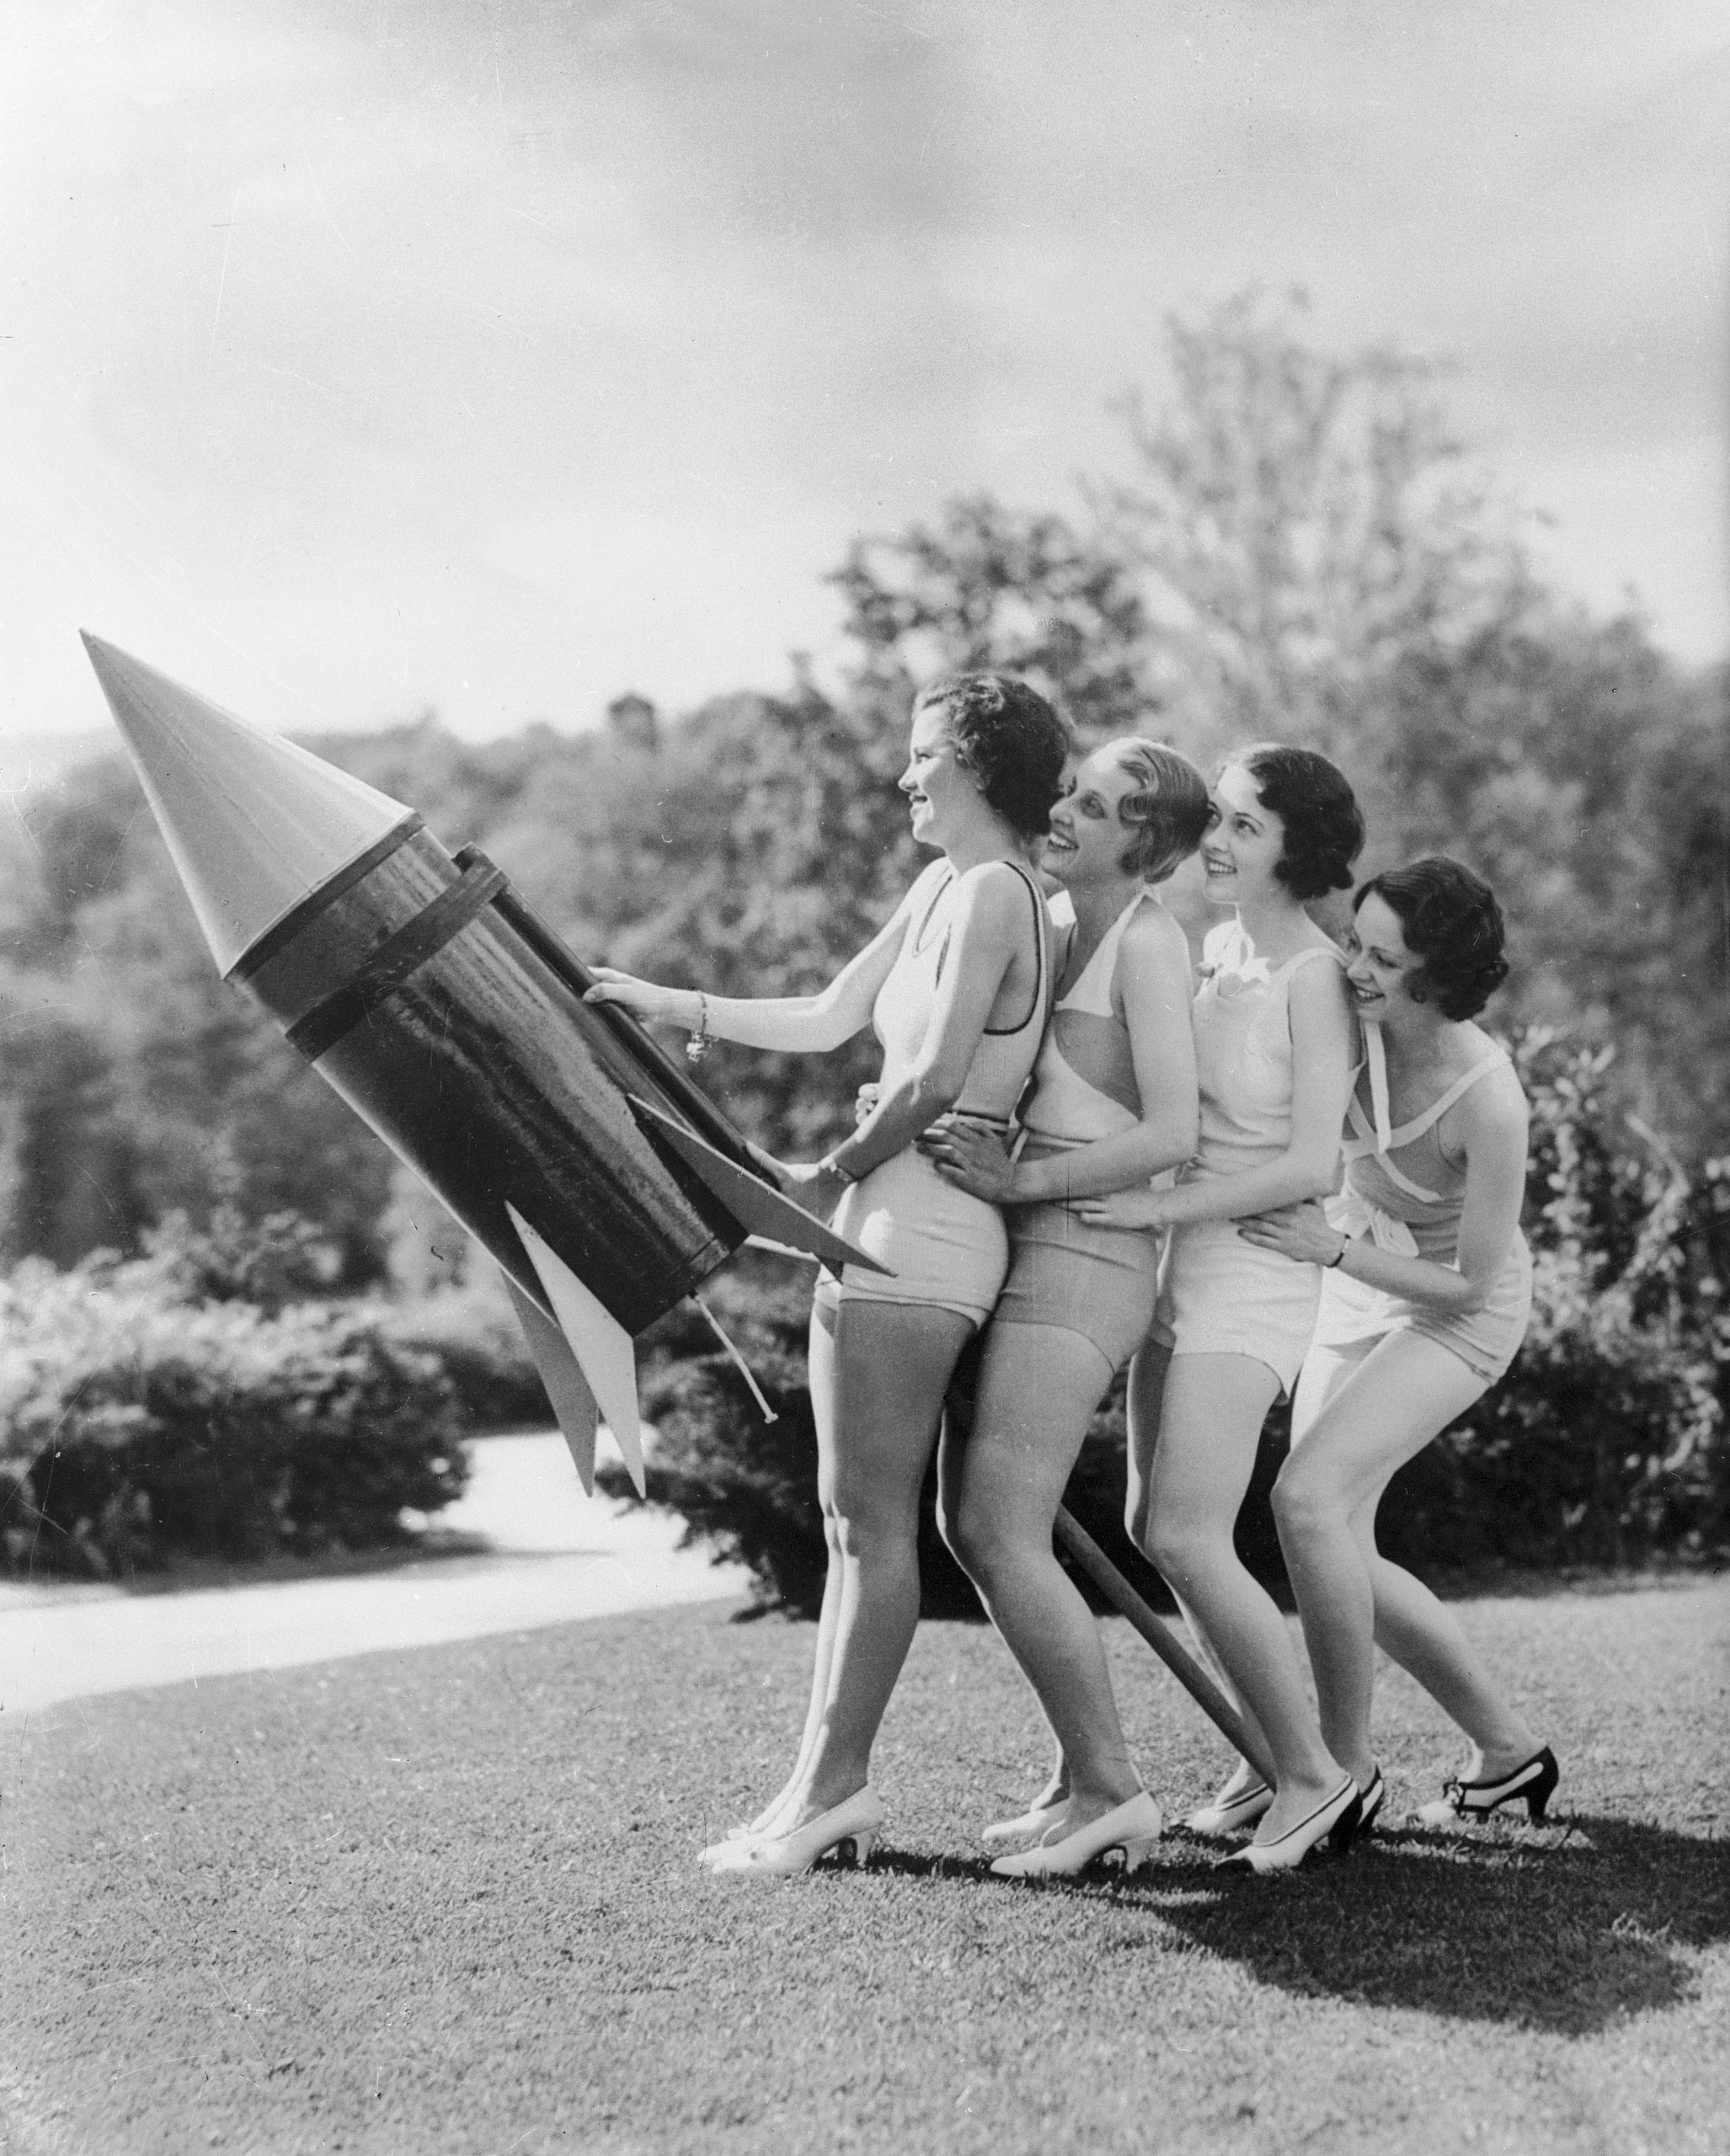 Members of the Greenbriar Amateur Movie Club of White Sulphur Springs, West Virginia with their rocket for 4th July celebrations, circa 1933.